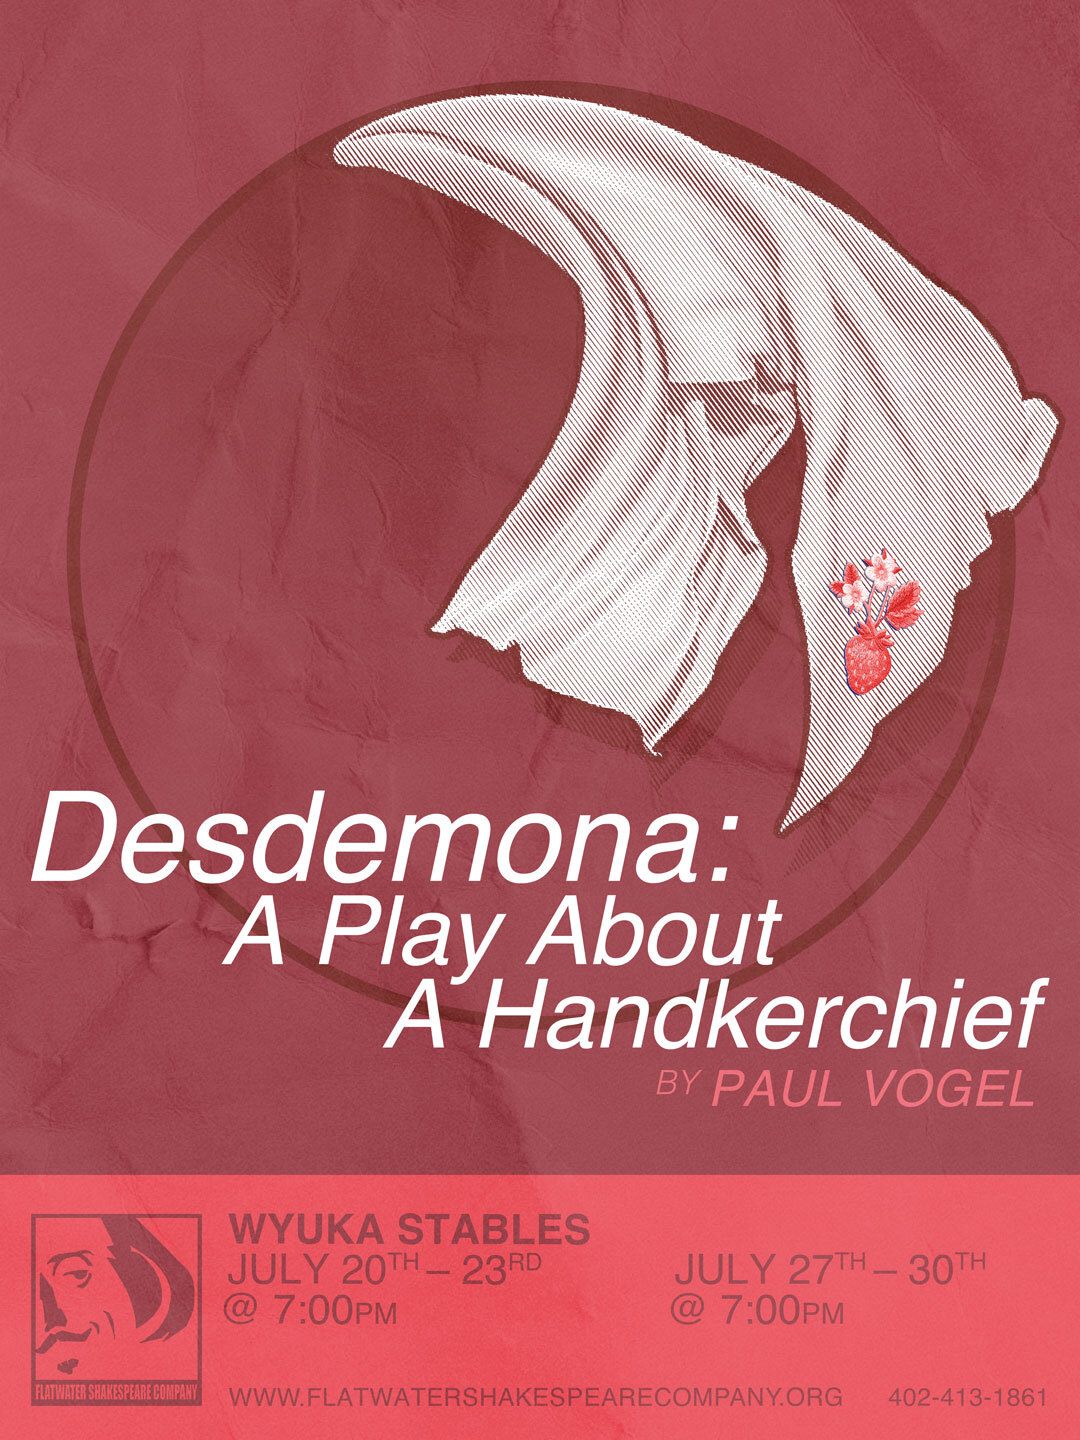 7/27 STU - STUDENT: Thurs. July 27, 2023 | 7:00 p.m. - 10:00 p.m. CST | Wyuka Stables (Desdemona: A Play about a Handkerchief)